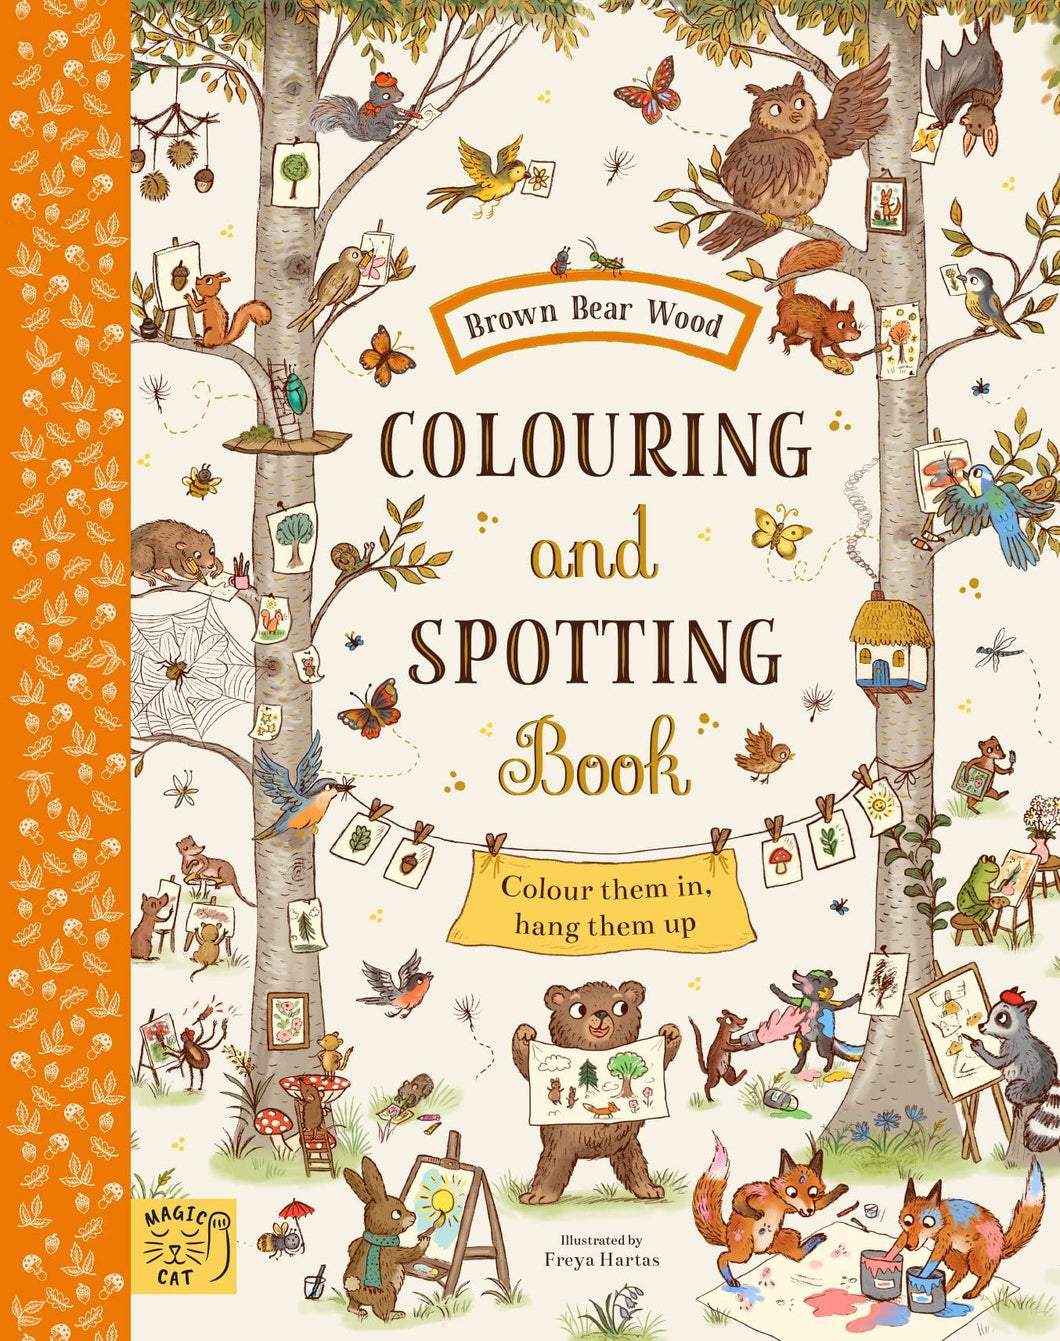 Brown Bear Wood Colouring and Spotting Book